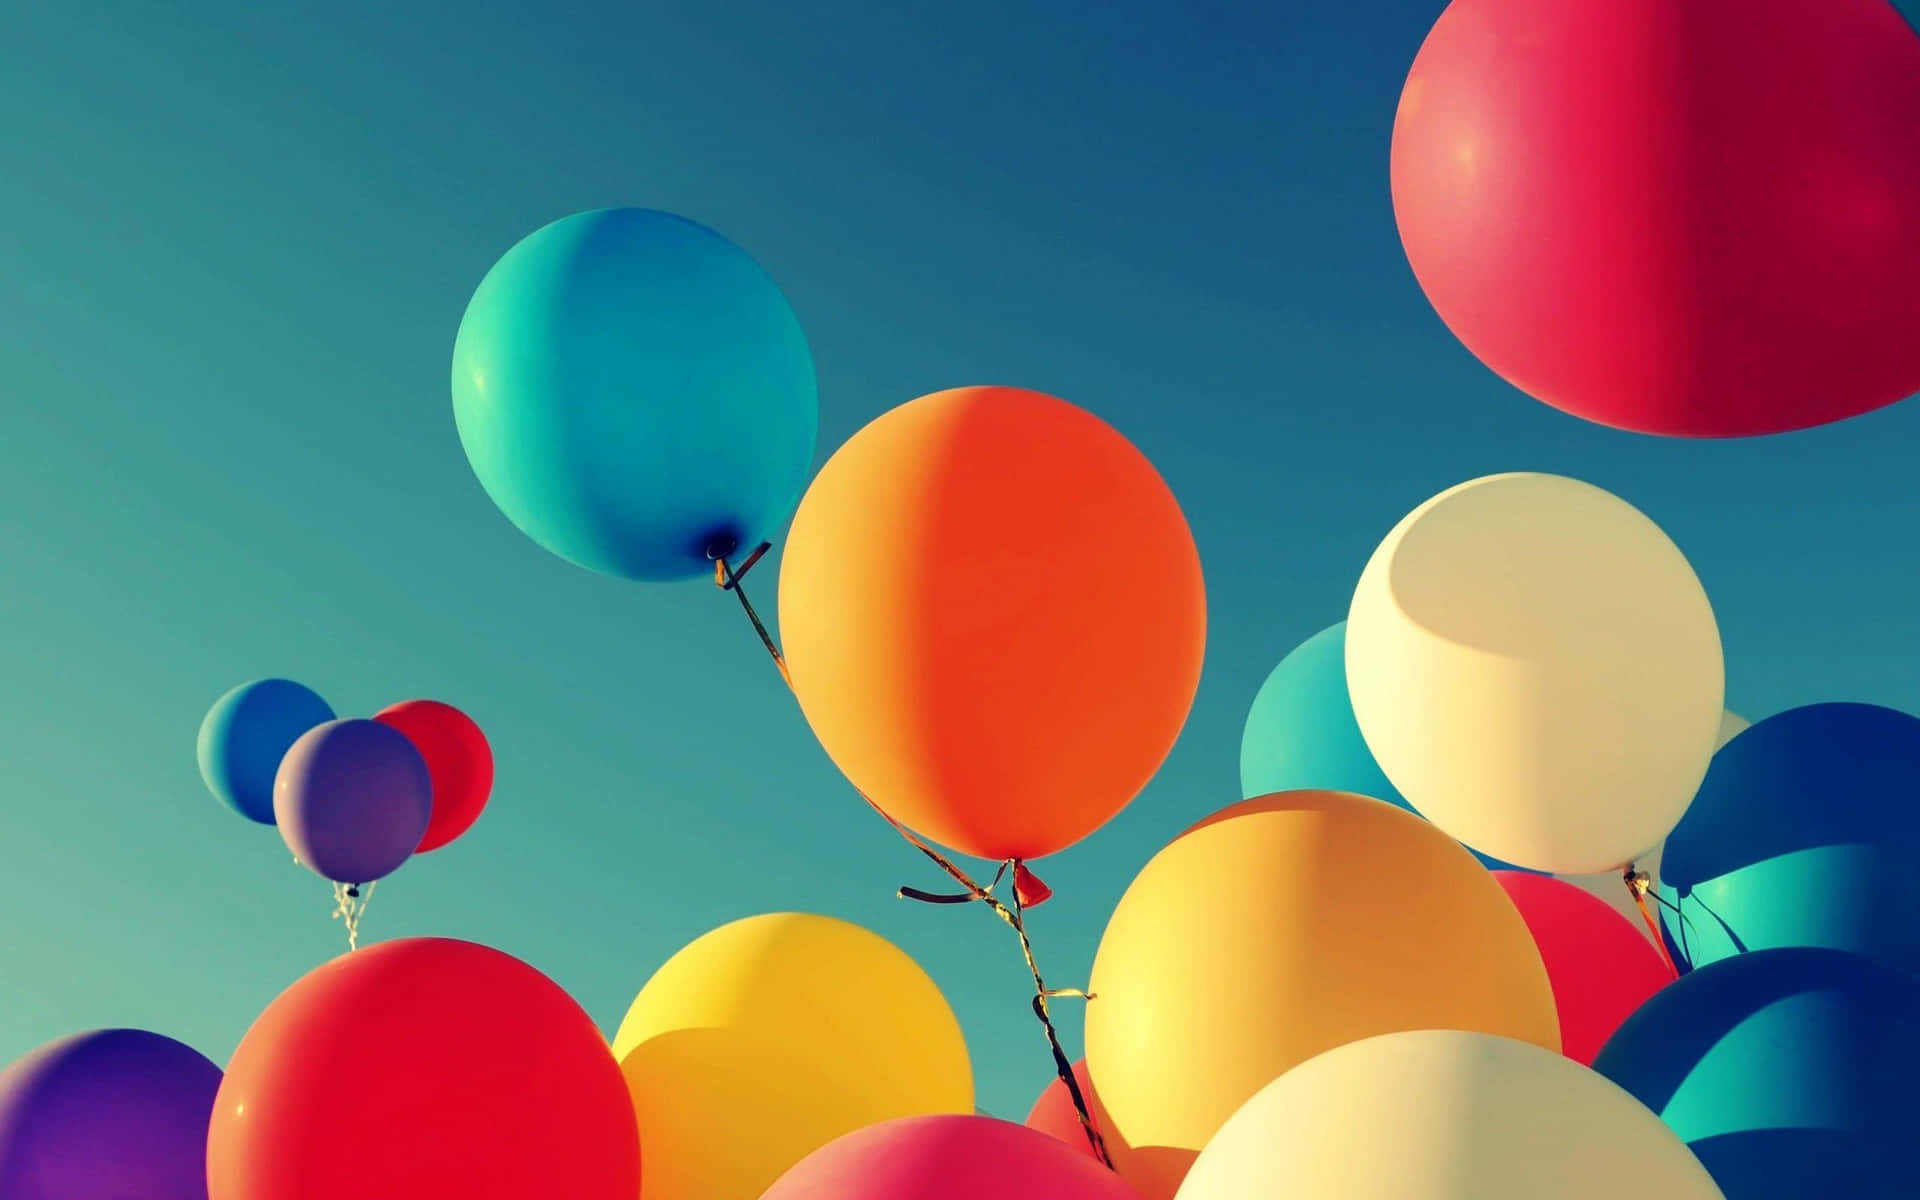 Balloons Background Floating Colorful Graphic Art